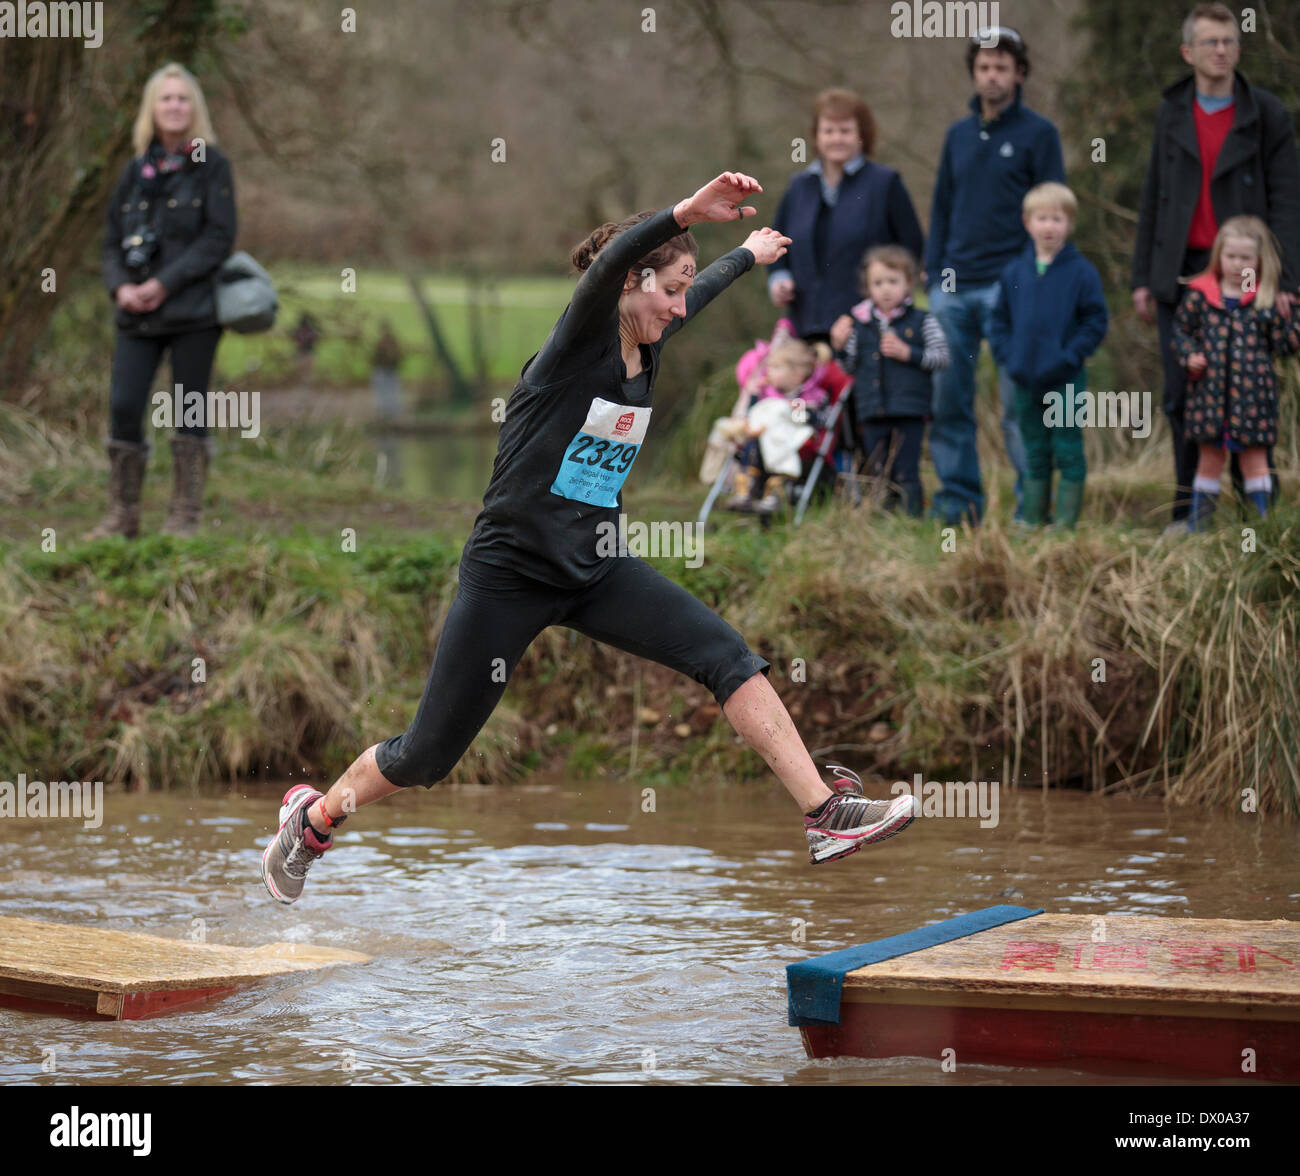 Exeter, Devon. March 15th 2014. A woman leaps across floating stepping stones on an obstacle course at Escot Park .Over 3,500 entrants entered the event which promotes fitness and team spirit. Credit:  Nick Cable/Alamy Live News Stock Photo